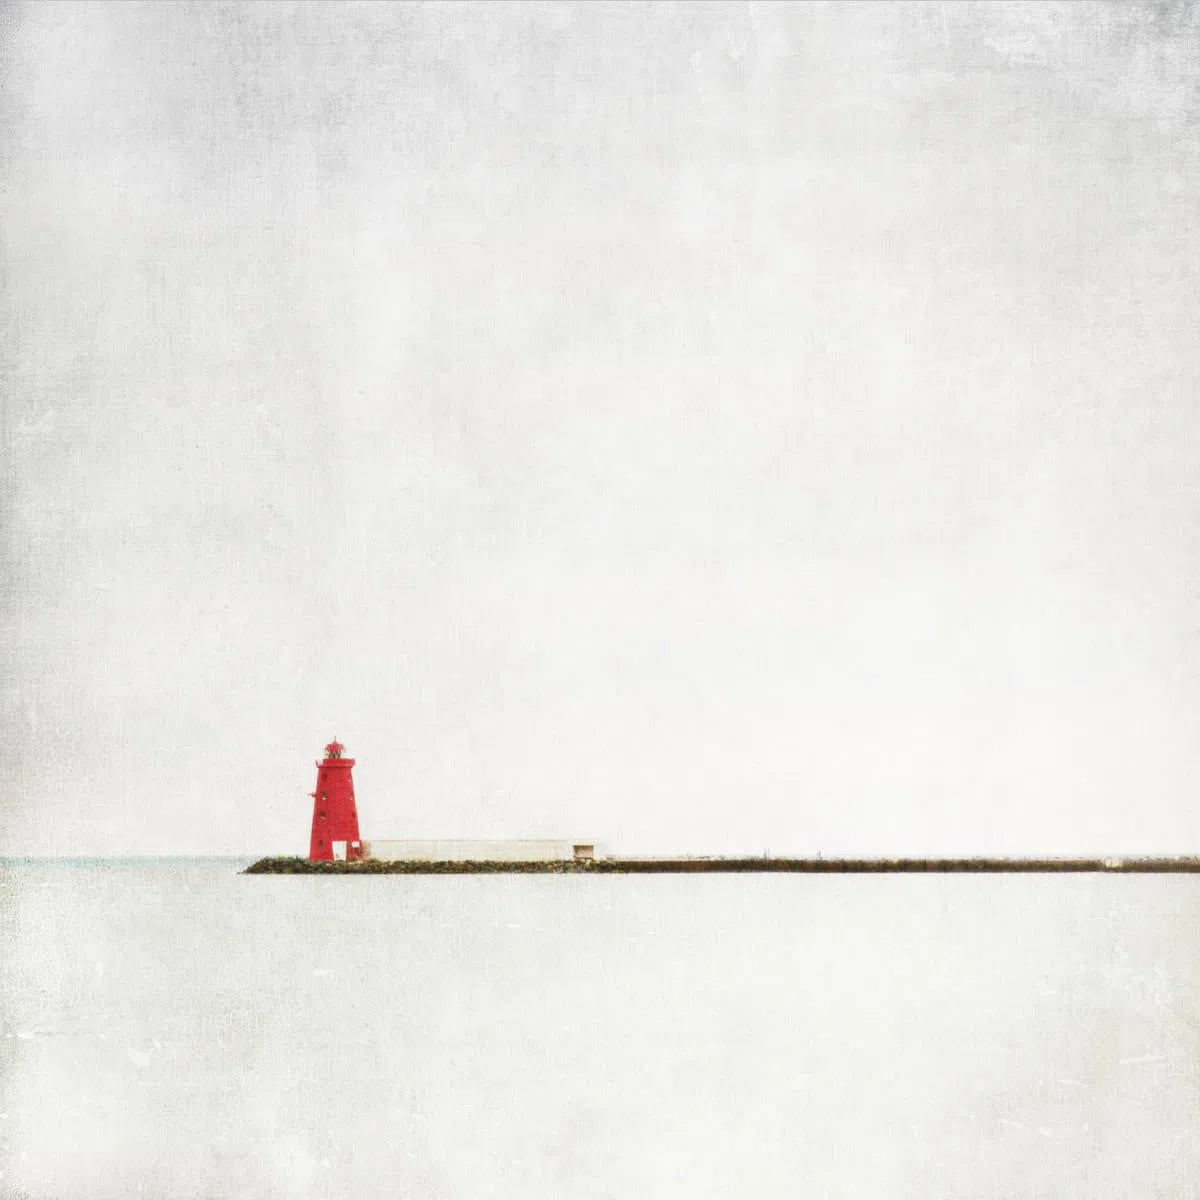 Poolbeg Lighthouse, by Maggy Morrissey-PurePhoto